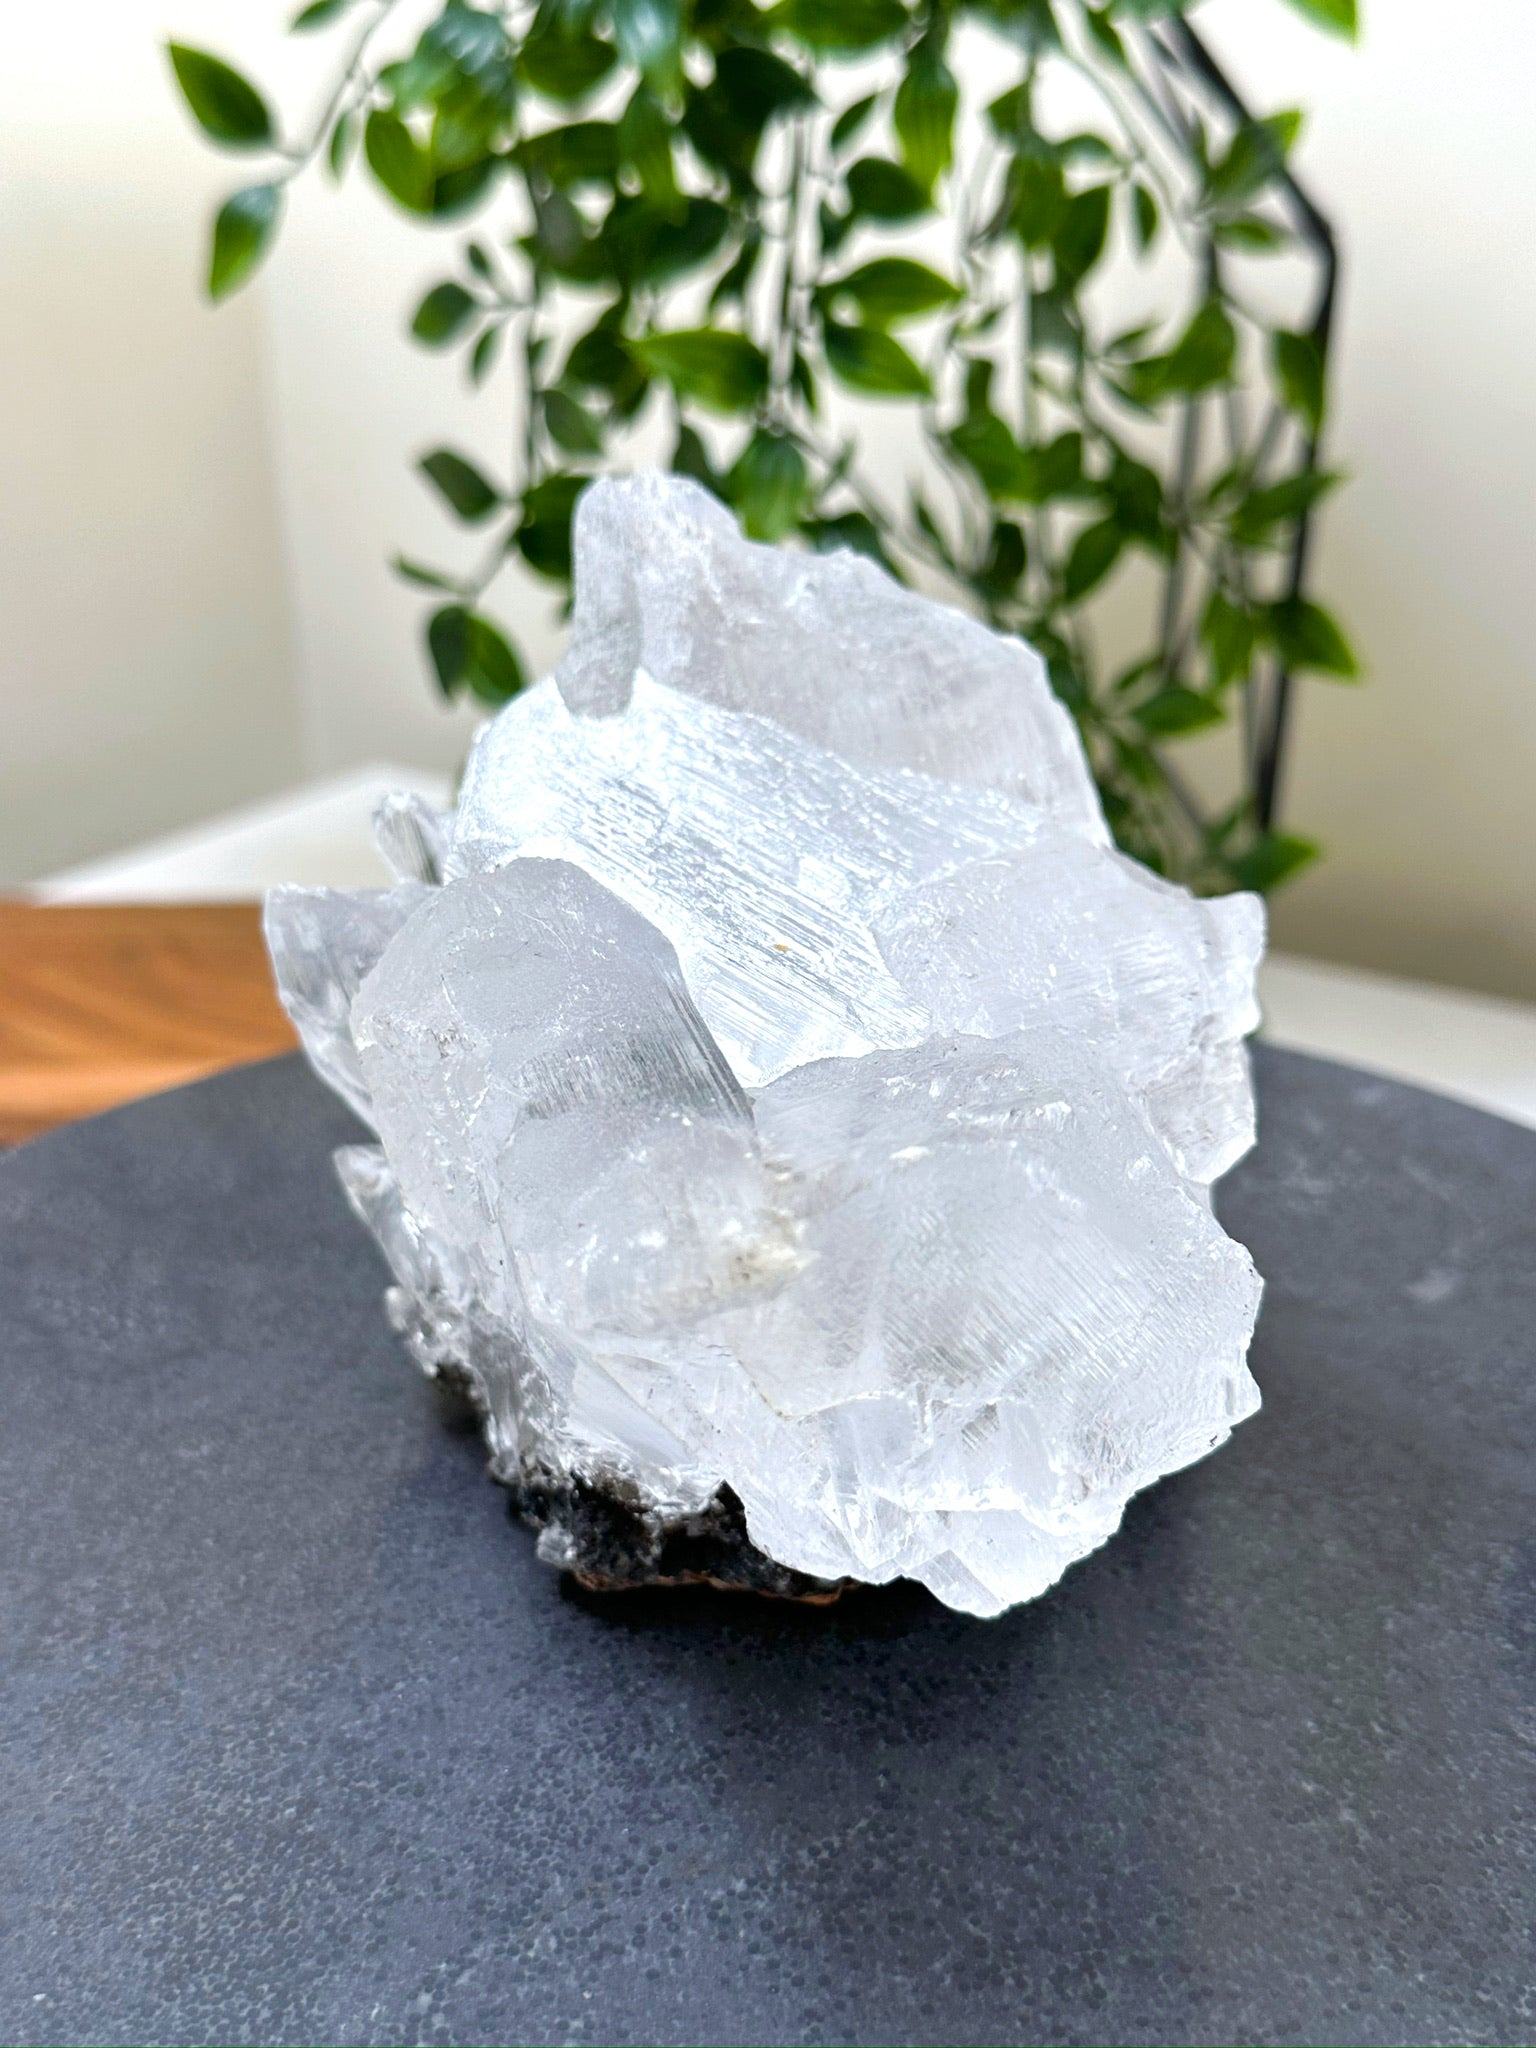 NAICA SELENITE 2 - naica mine, naica selenite, once in a blue moon, one of a kind, Recently added, selenite - The Mineral Maven